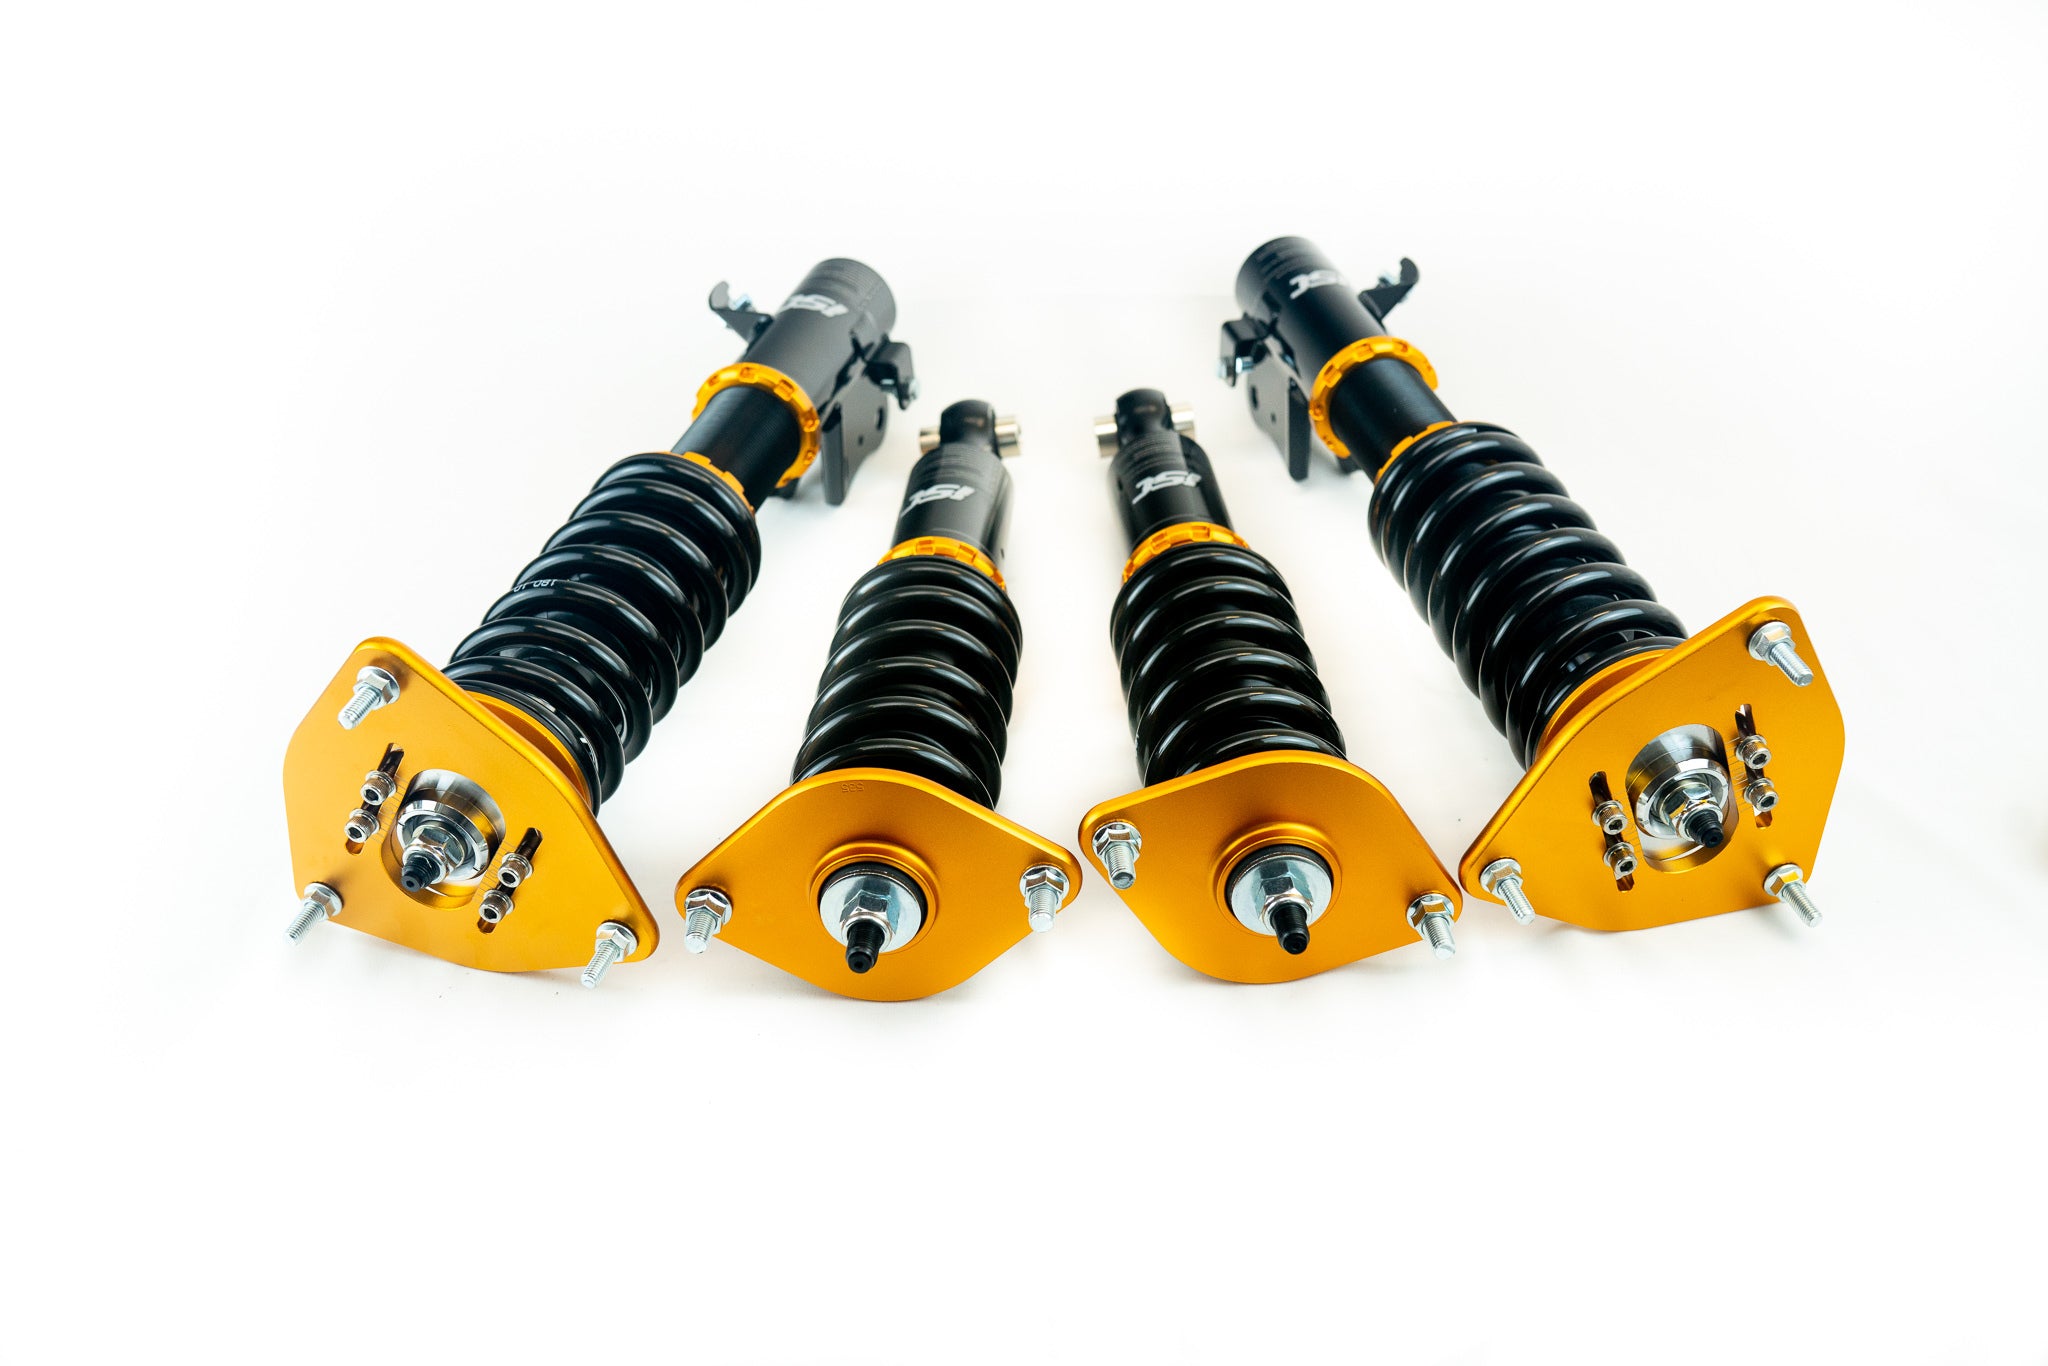 ISC Suspension 14+ Subaru Forester N1 Coilovers - Street